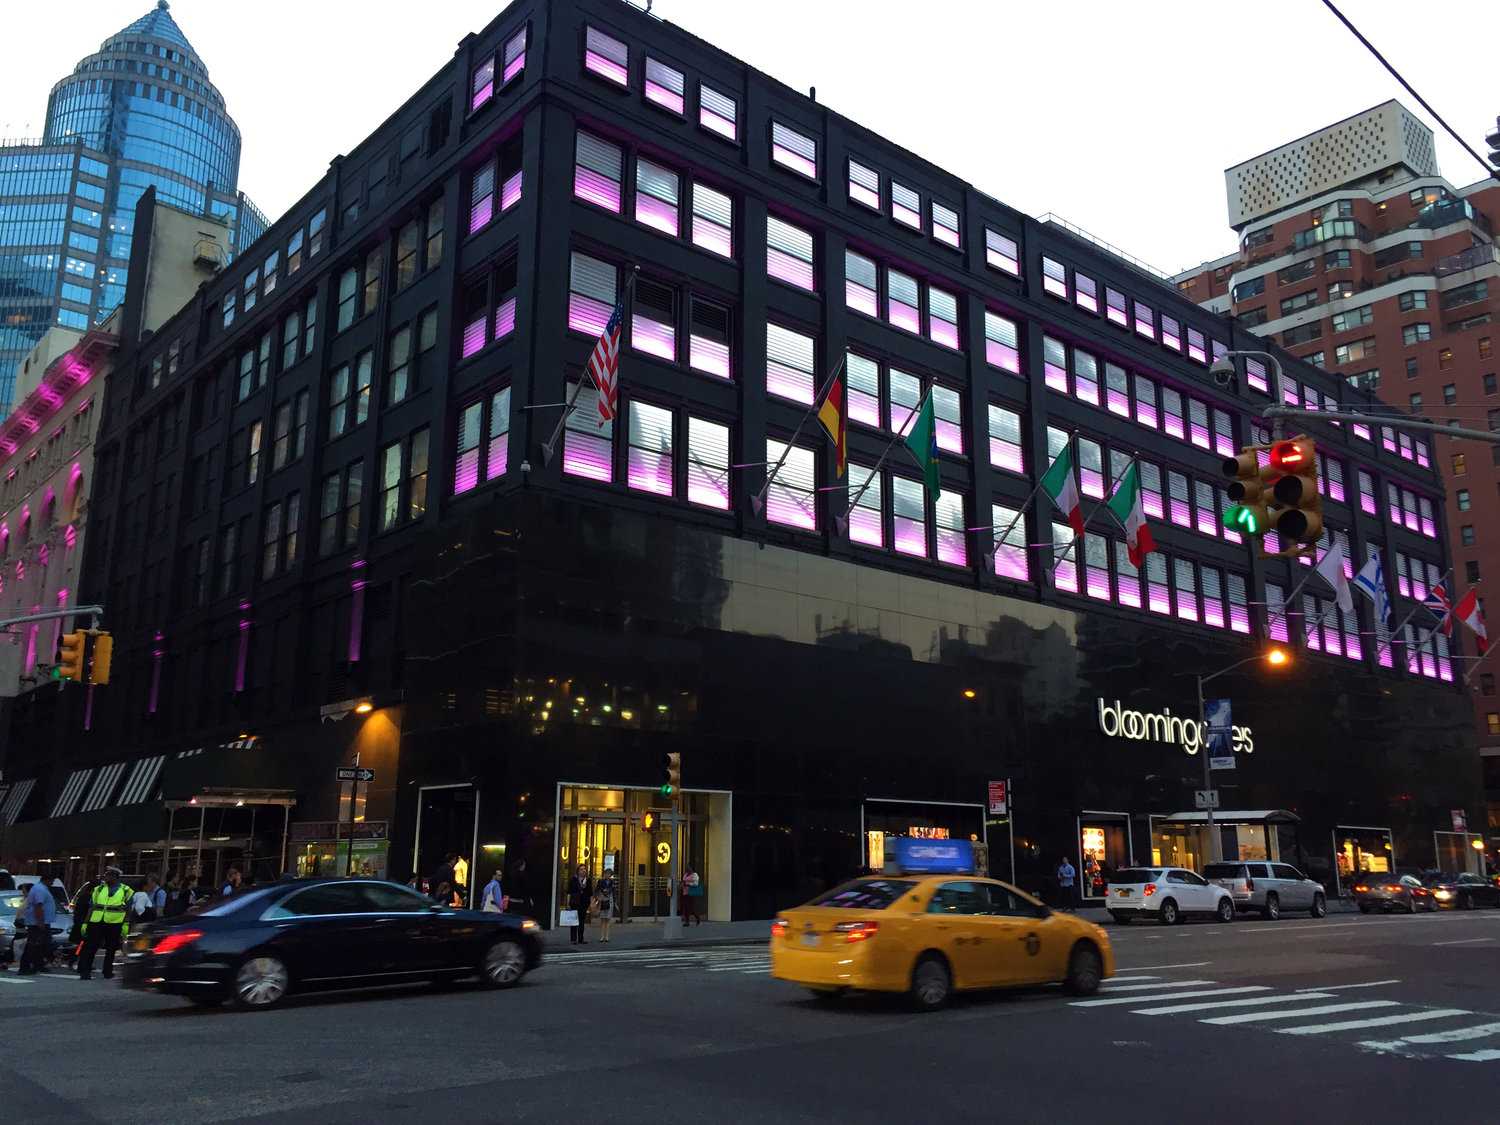 The Bloomingdale's Store in New York City. 1000 3rd Avenue to 59th Street  and Lexington Avenue Stock Photo - Alamy